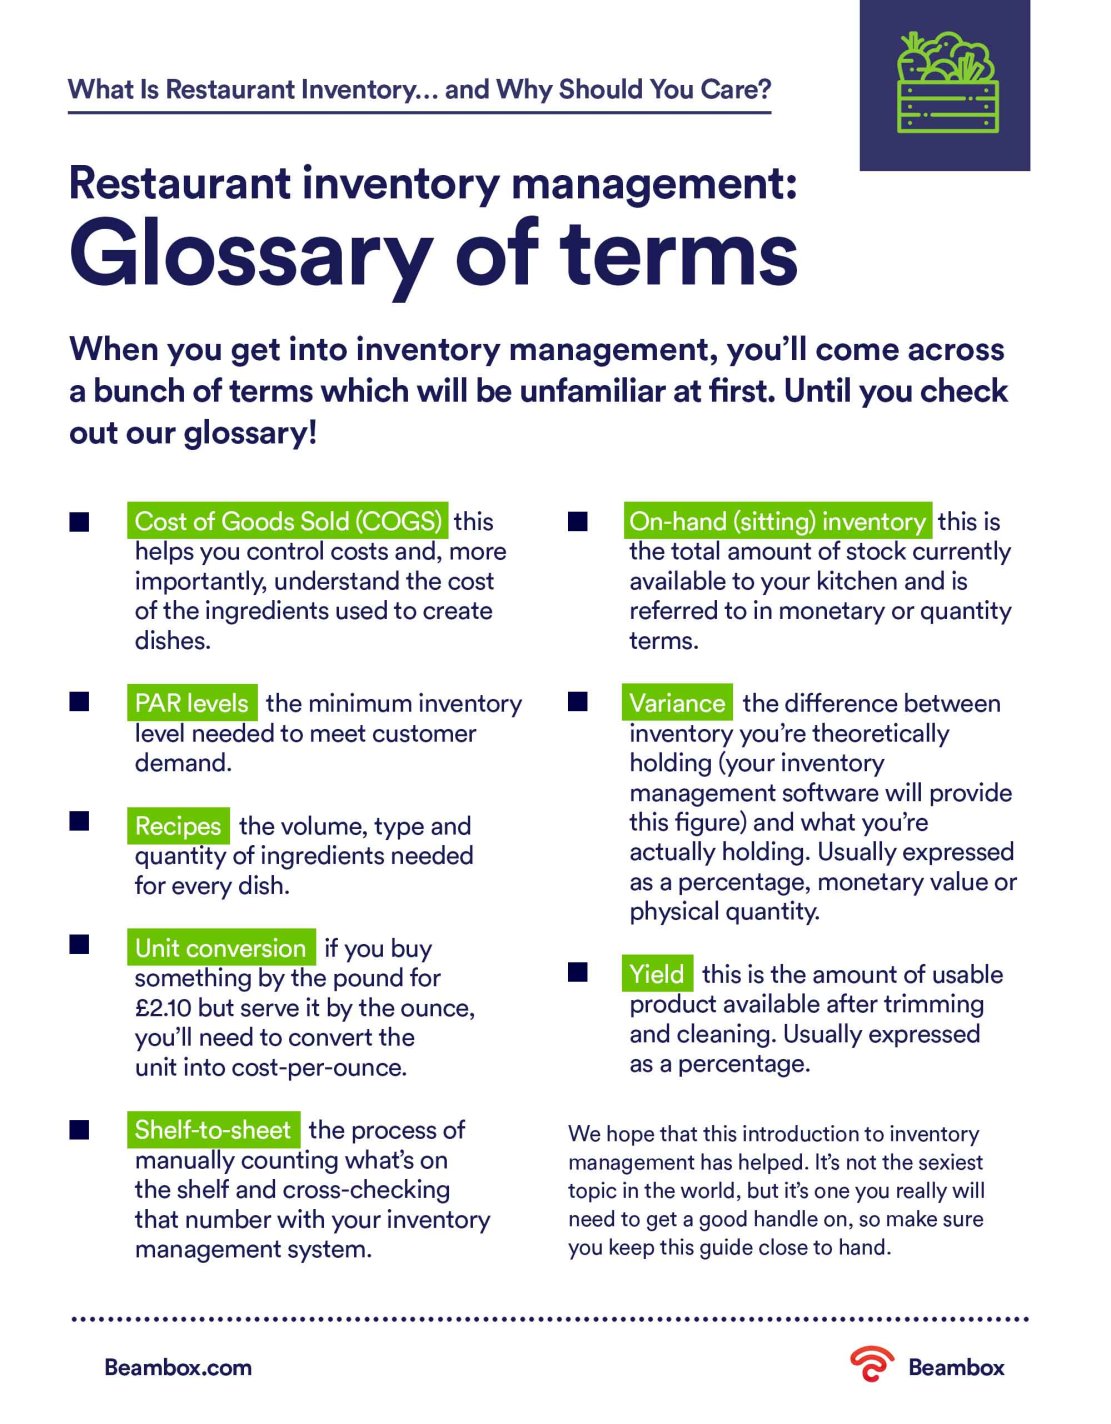 Restaurant-inventory-management---Glossary-of-terms